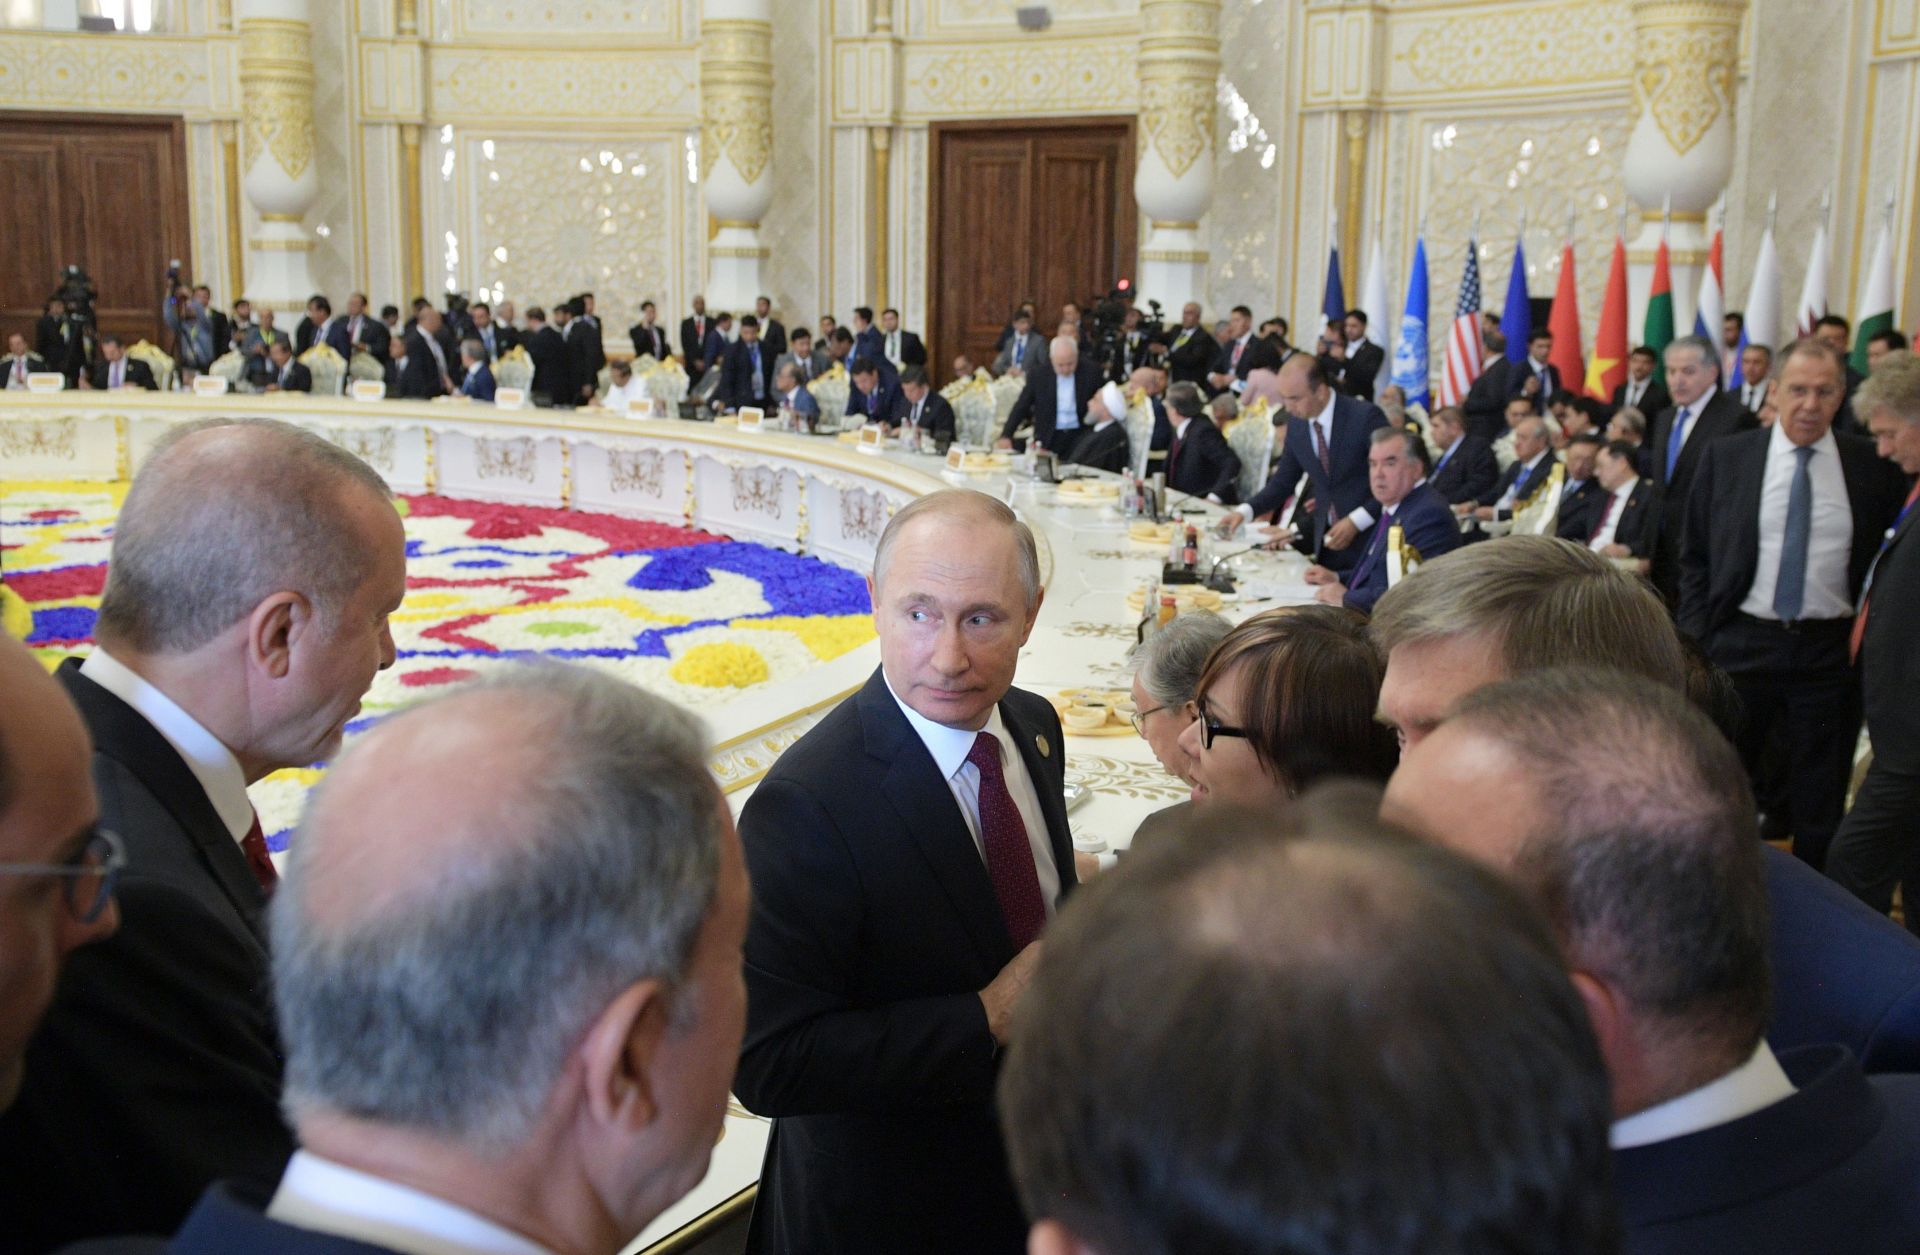 Russian President Vladimir Putin (center) listens to his Turkish counterpart Recep Tayyip Erdogan (left) at the 2019 Conference on Interaction and Confidence-Building Measures in Asia (CICA) in Dushanbe, Tajikistan. 